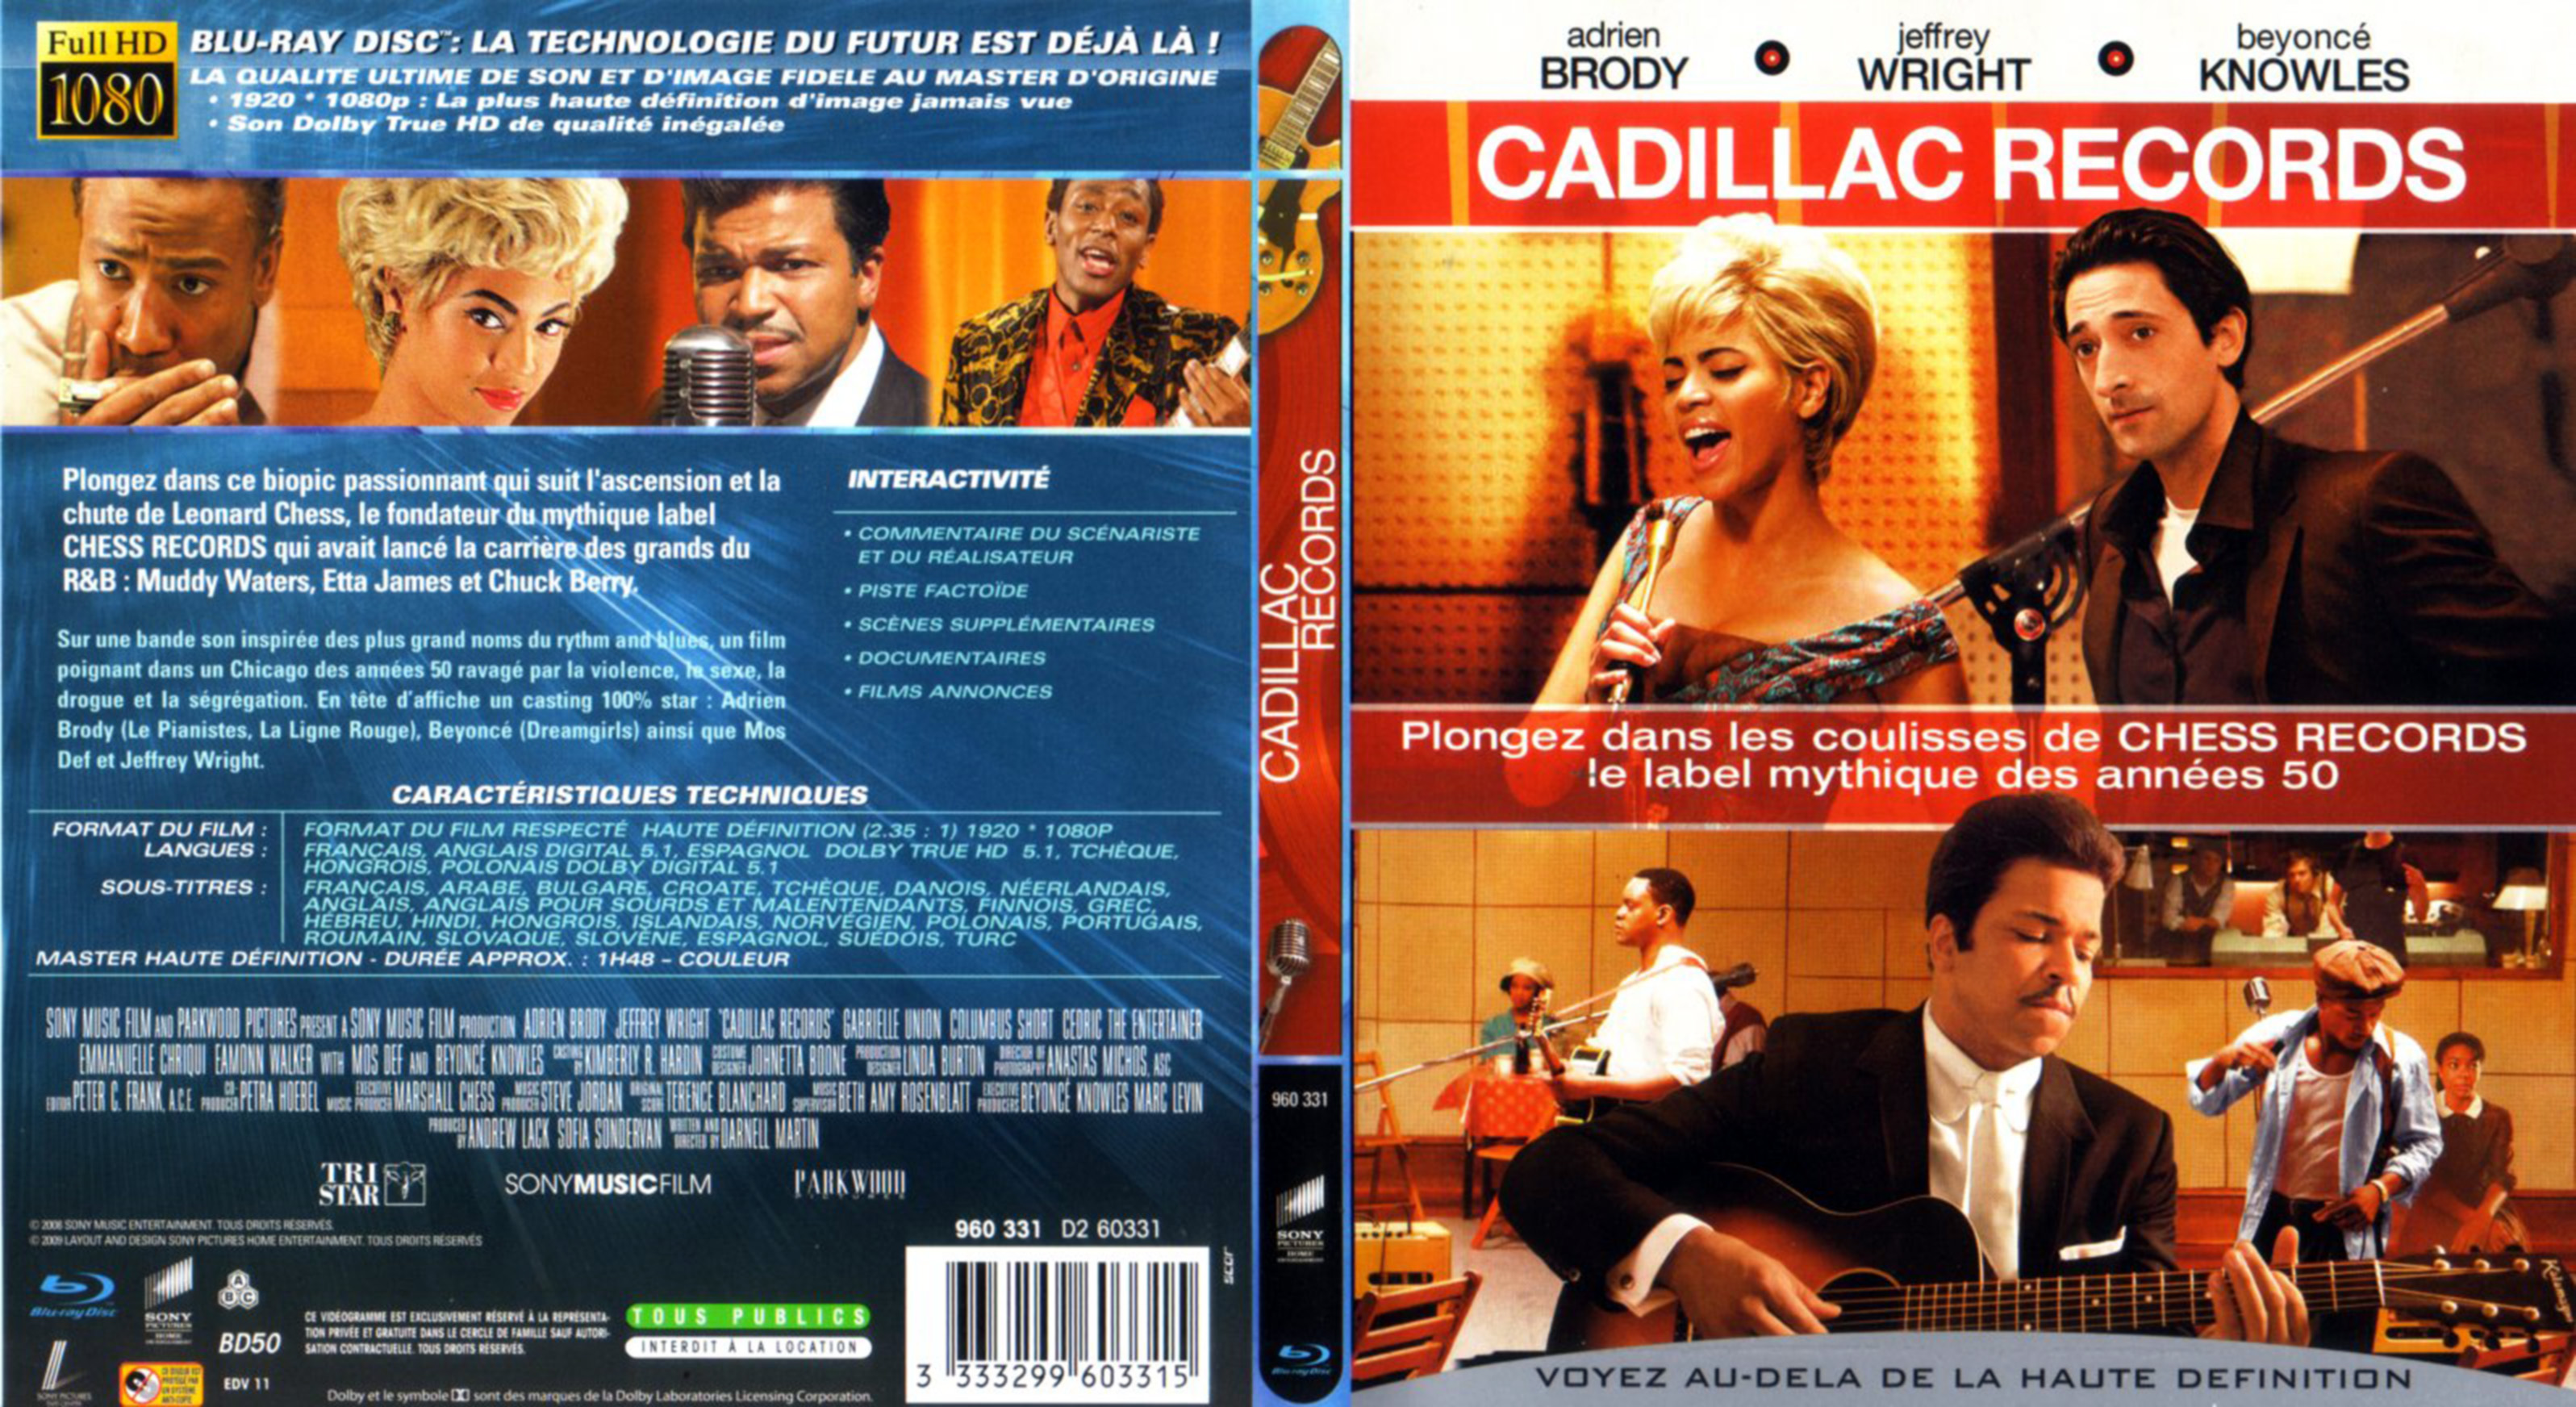 Jaquette DVD Cadillac records (BLU-RAY)